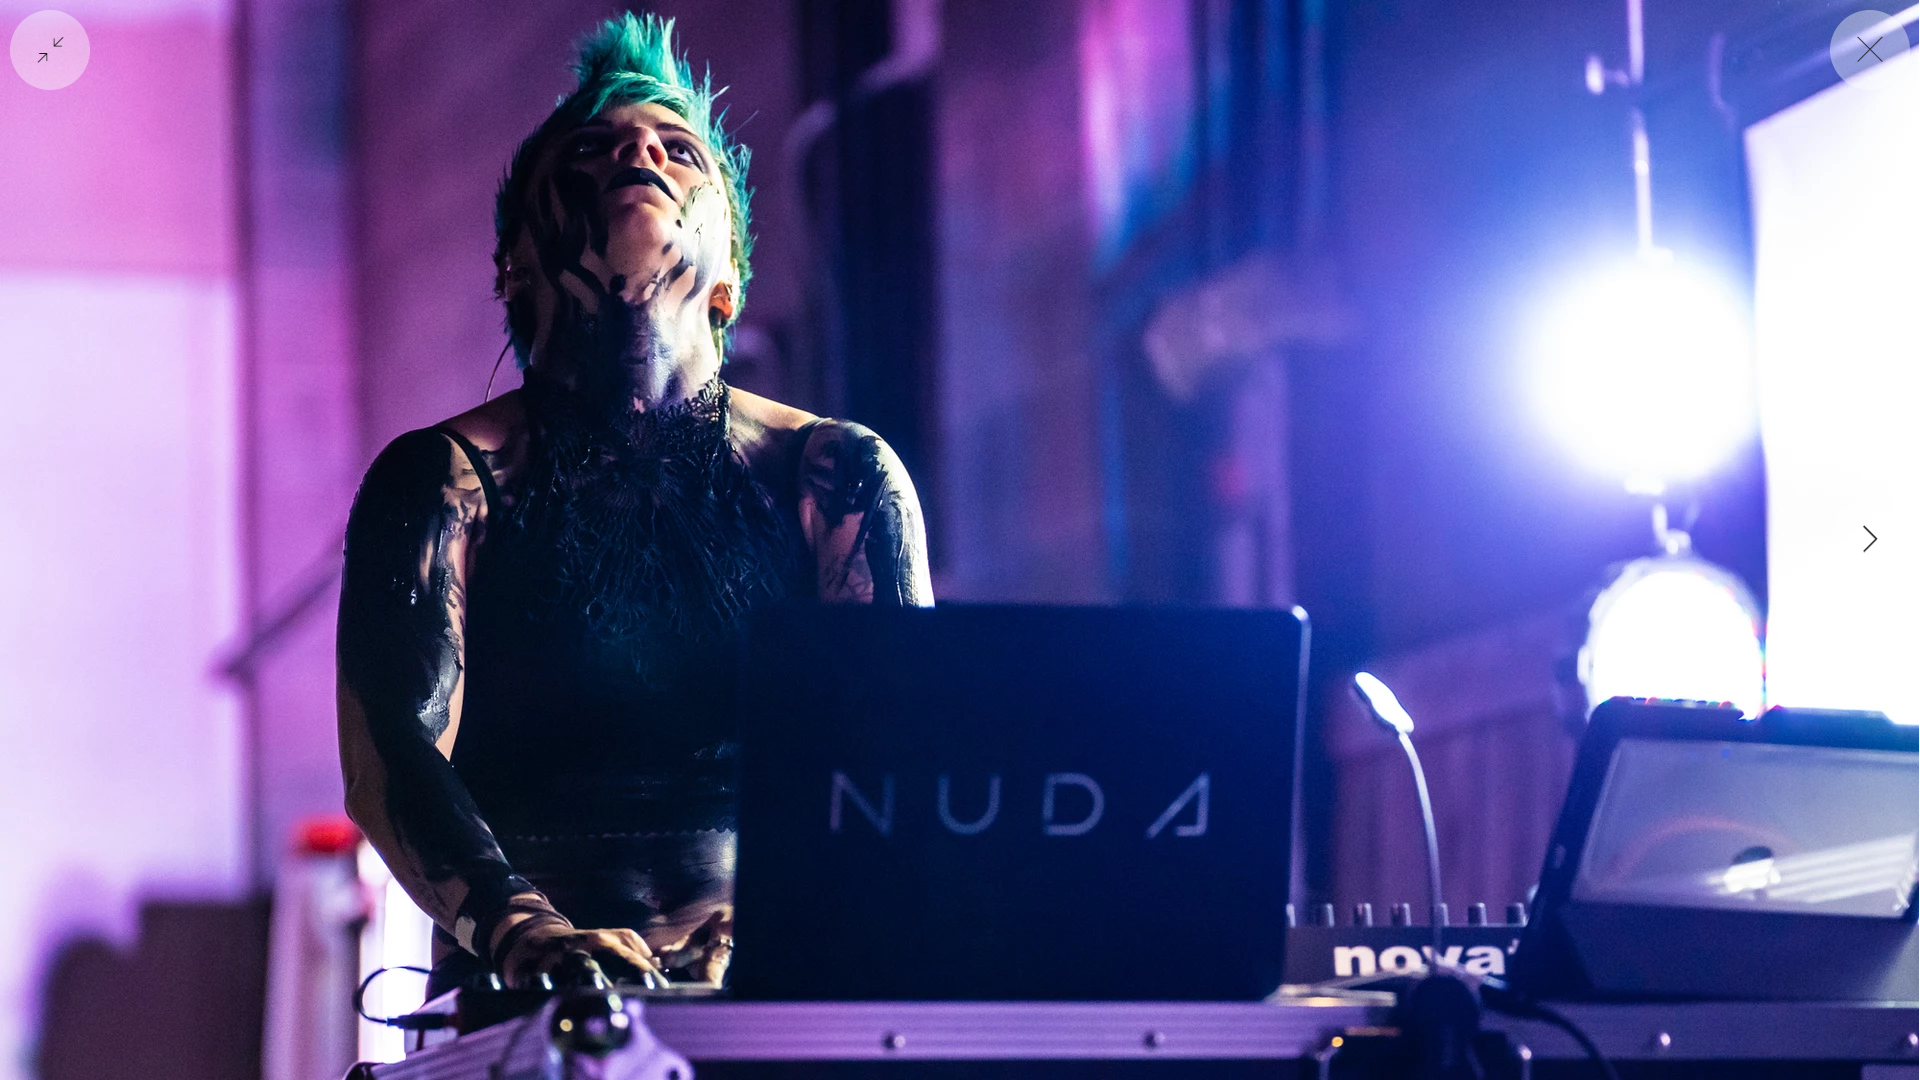 From Seattle, Nuda Brings Gritty Electronica